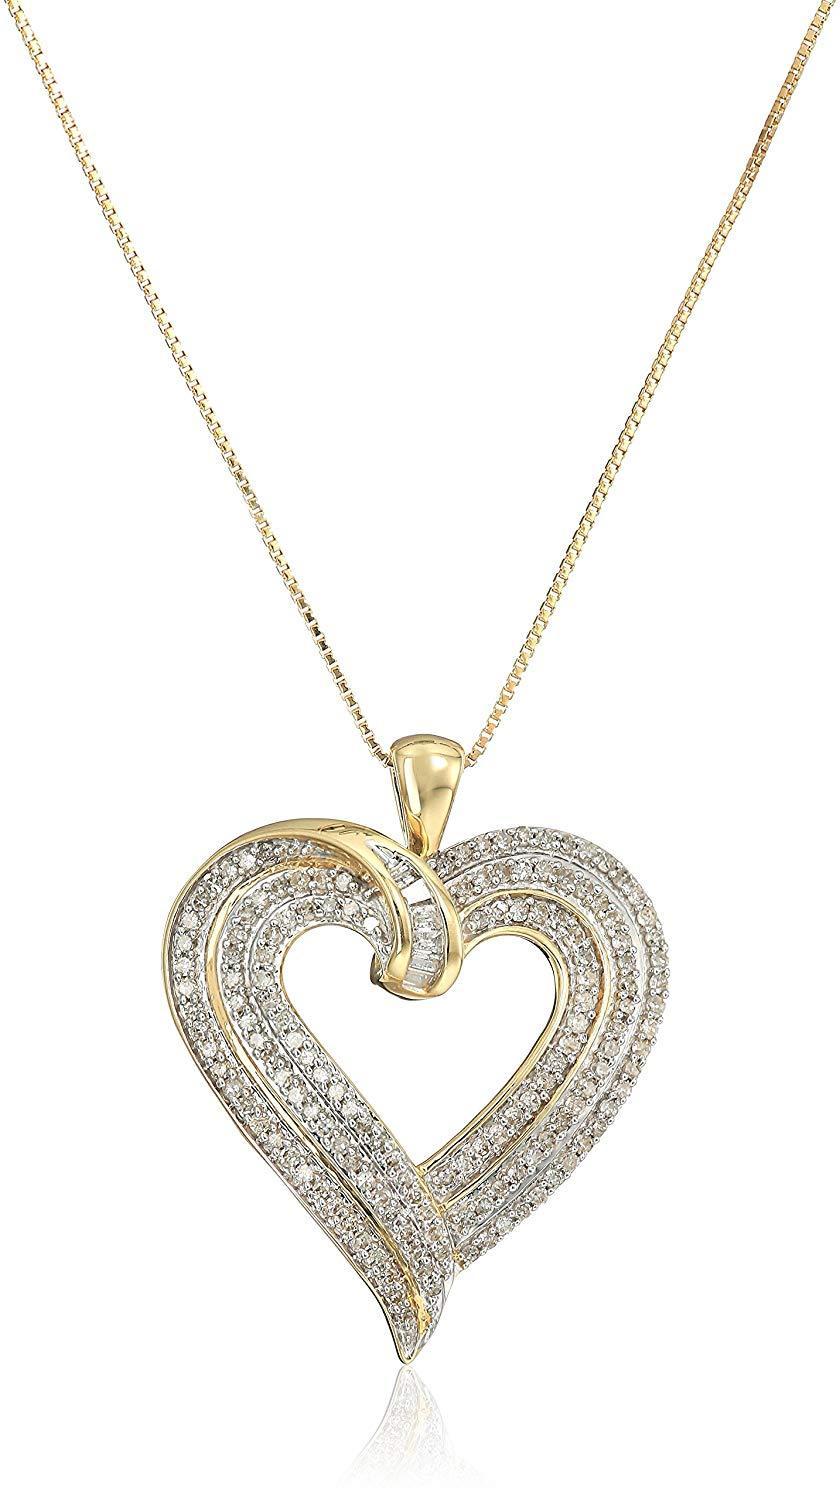 10kt Yellow Gold 1/2cttw Baguette and Round Diamond Heart Pendant Necklace, 18